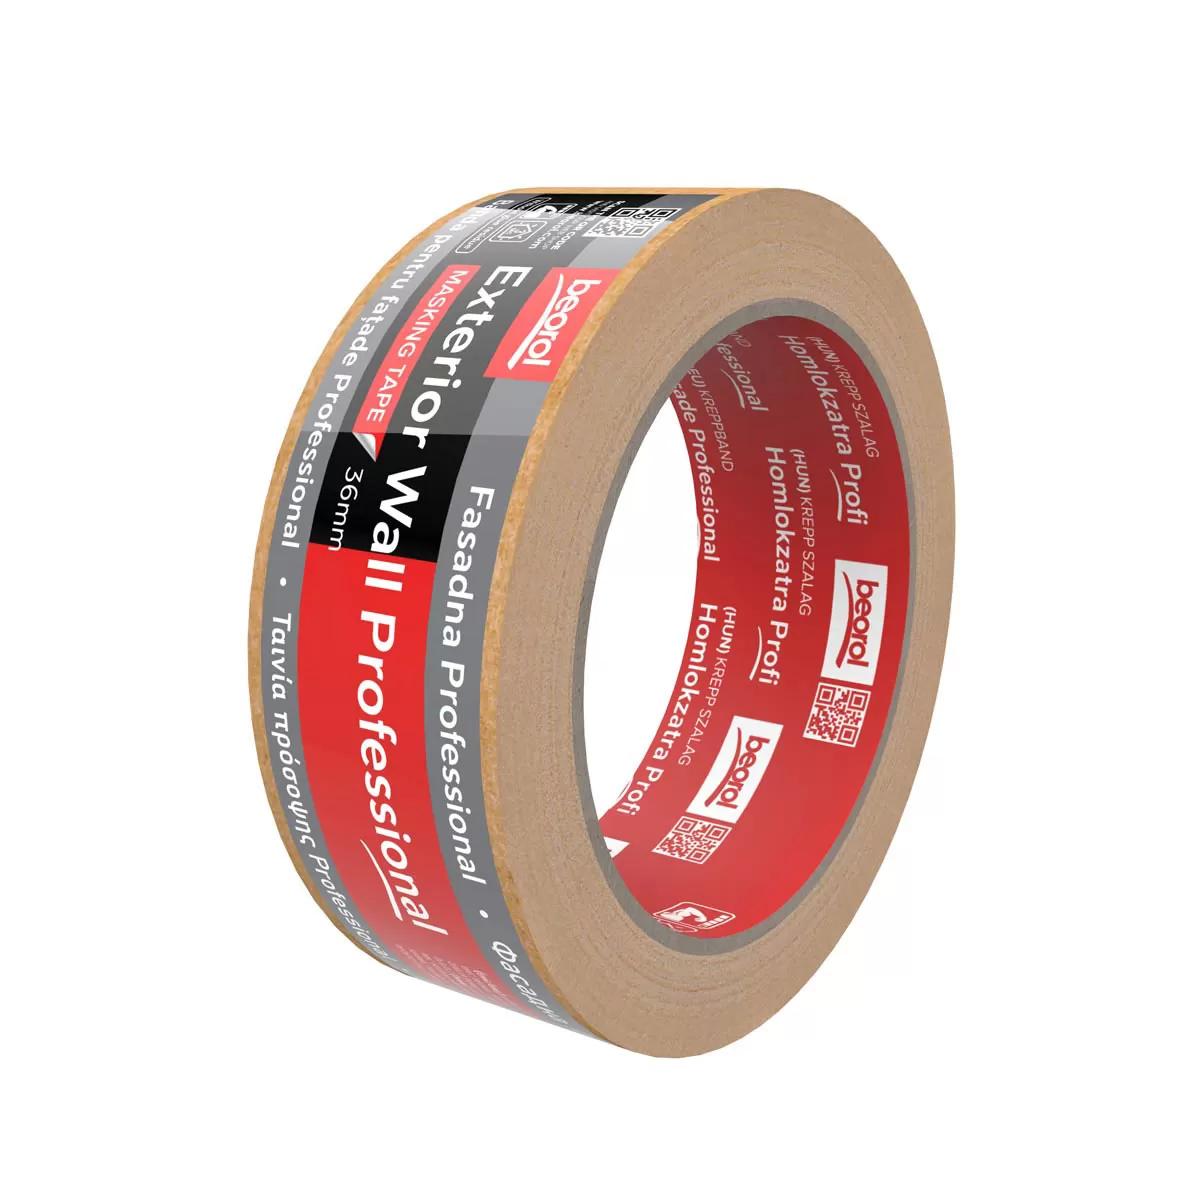 Masking tape Exterior Wall Professional 36mm x 50m 